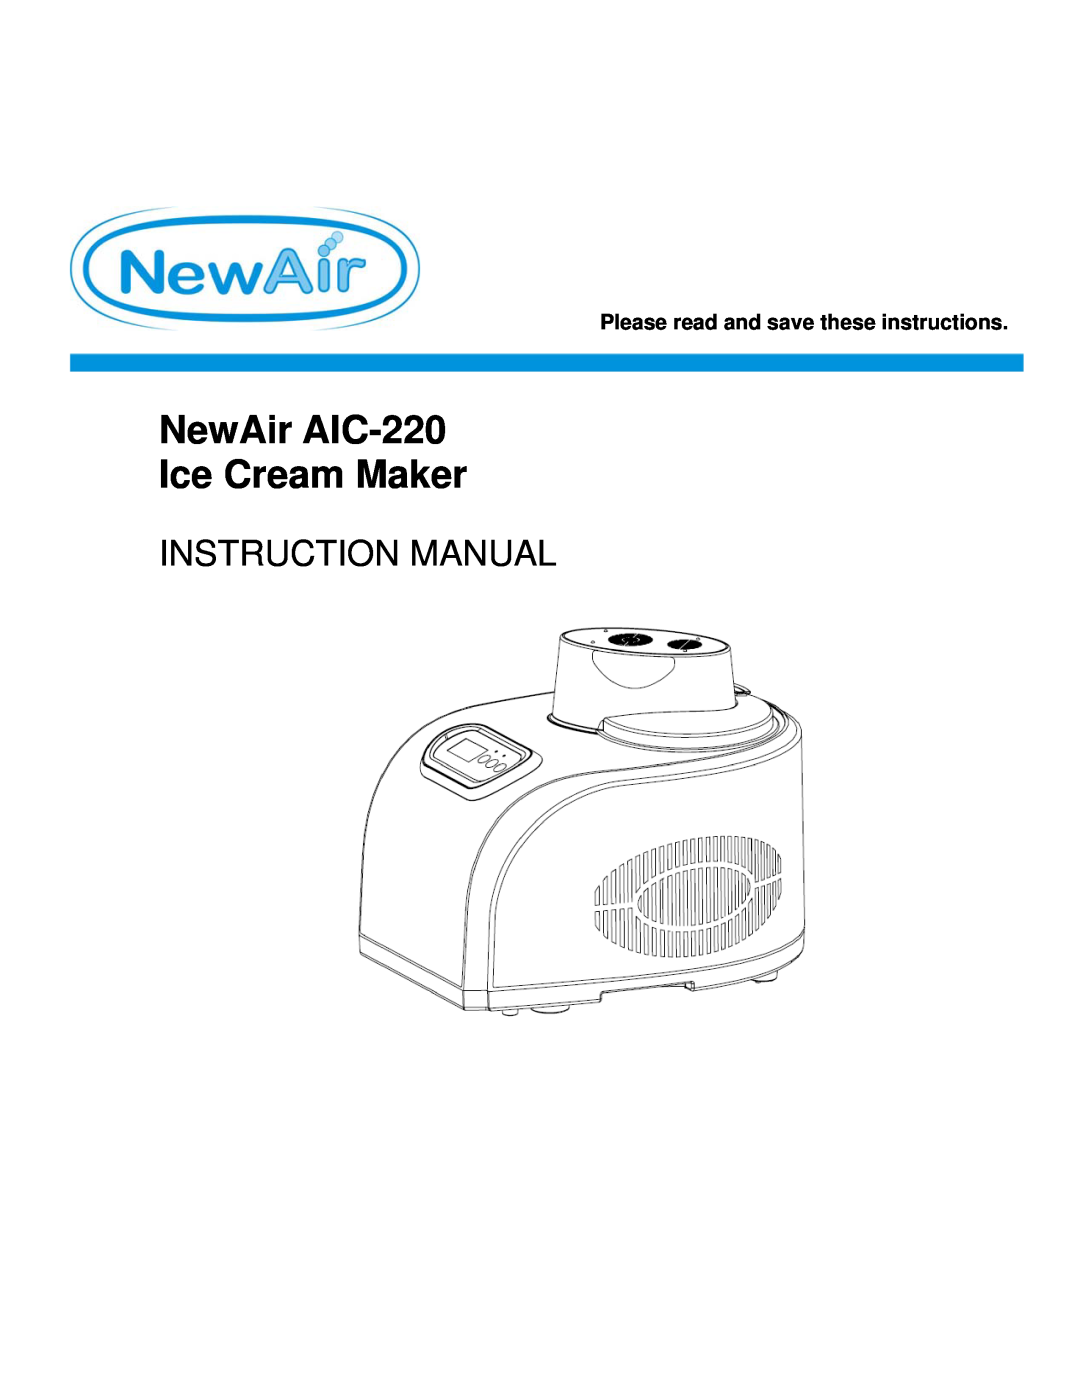 NewAir instruction manual NewAir AIC-220Ice Cream Maker, Please read and save these instructions 